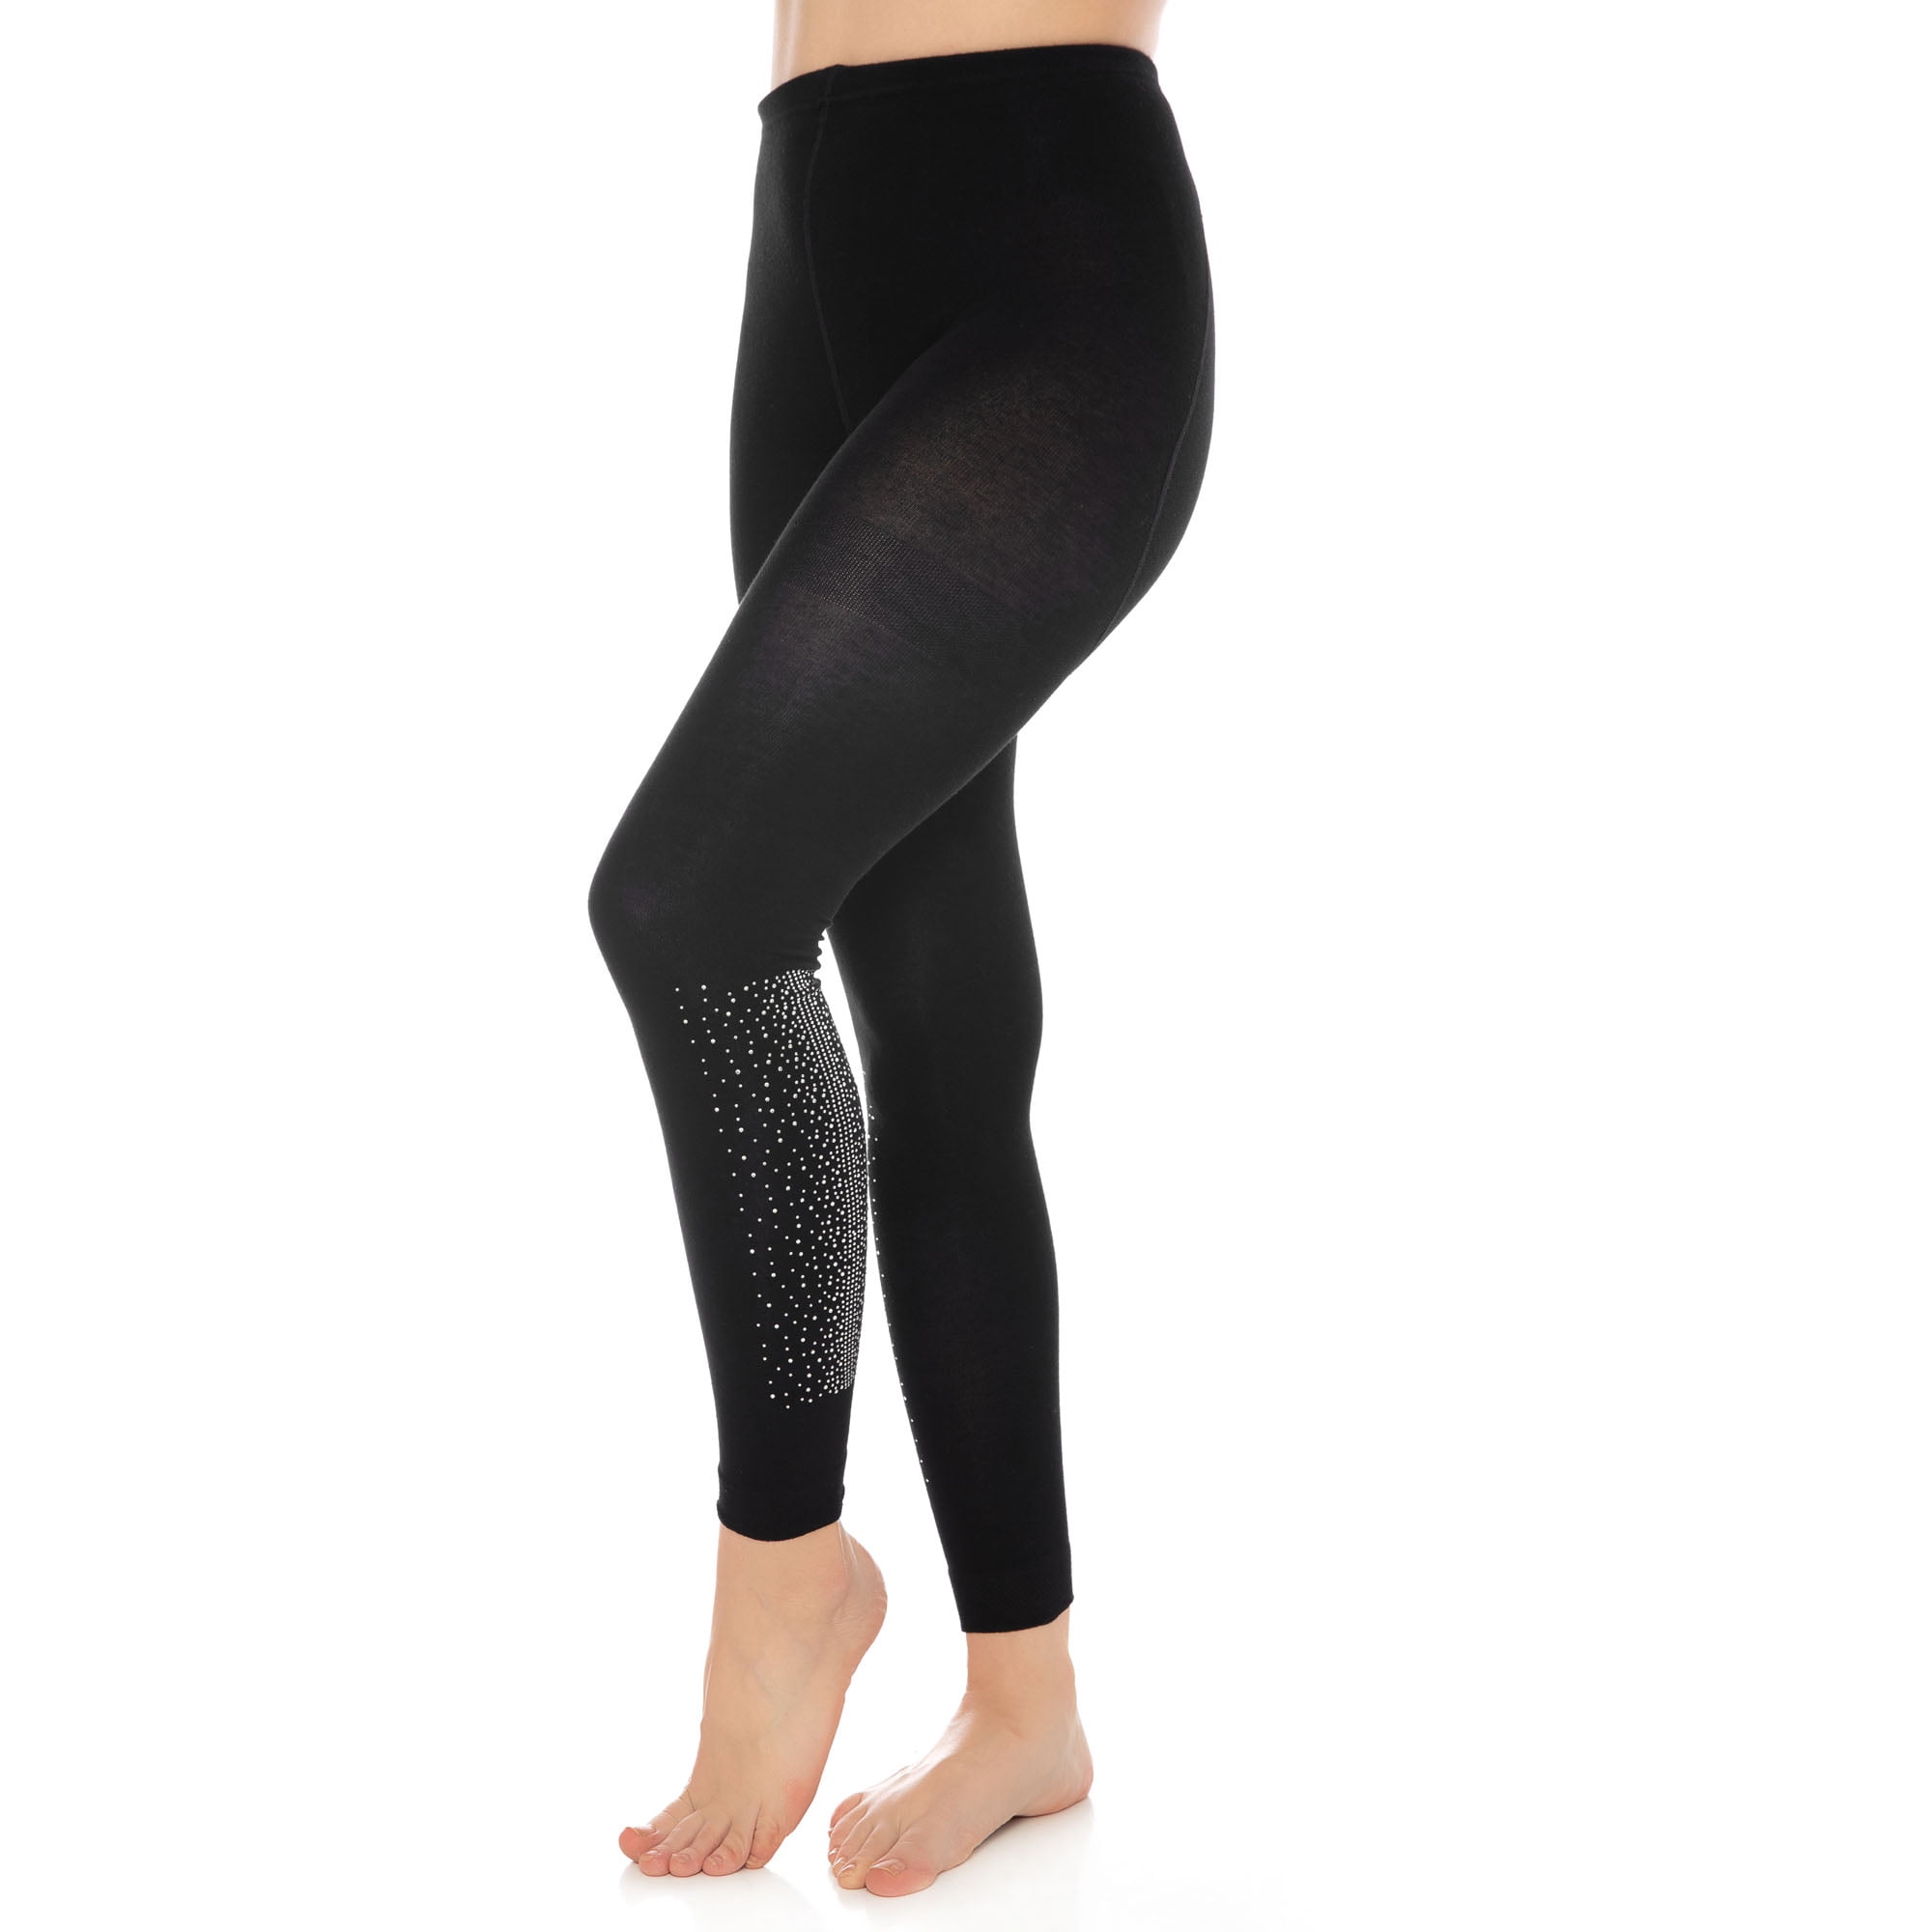 Bamboo Leggings for Women Soft Stretchy Full Length Tight with Fancy  Accessories - S3